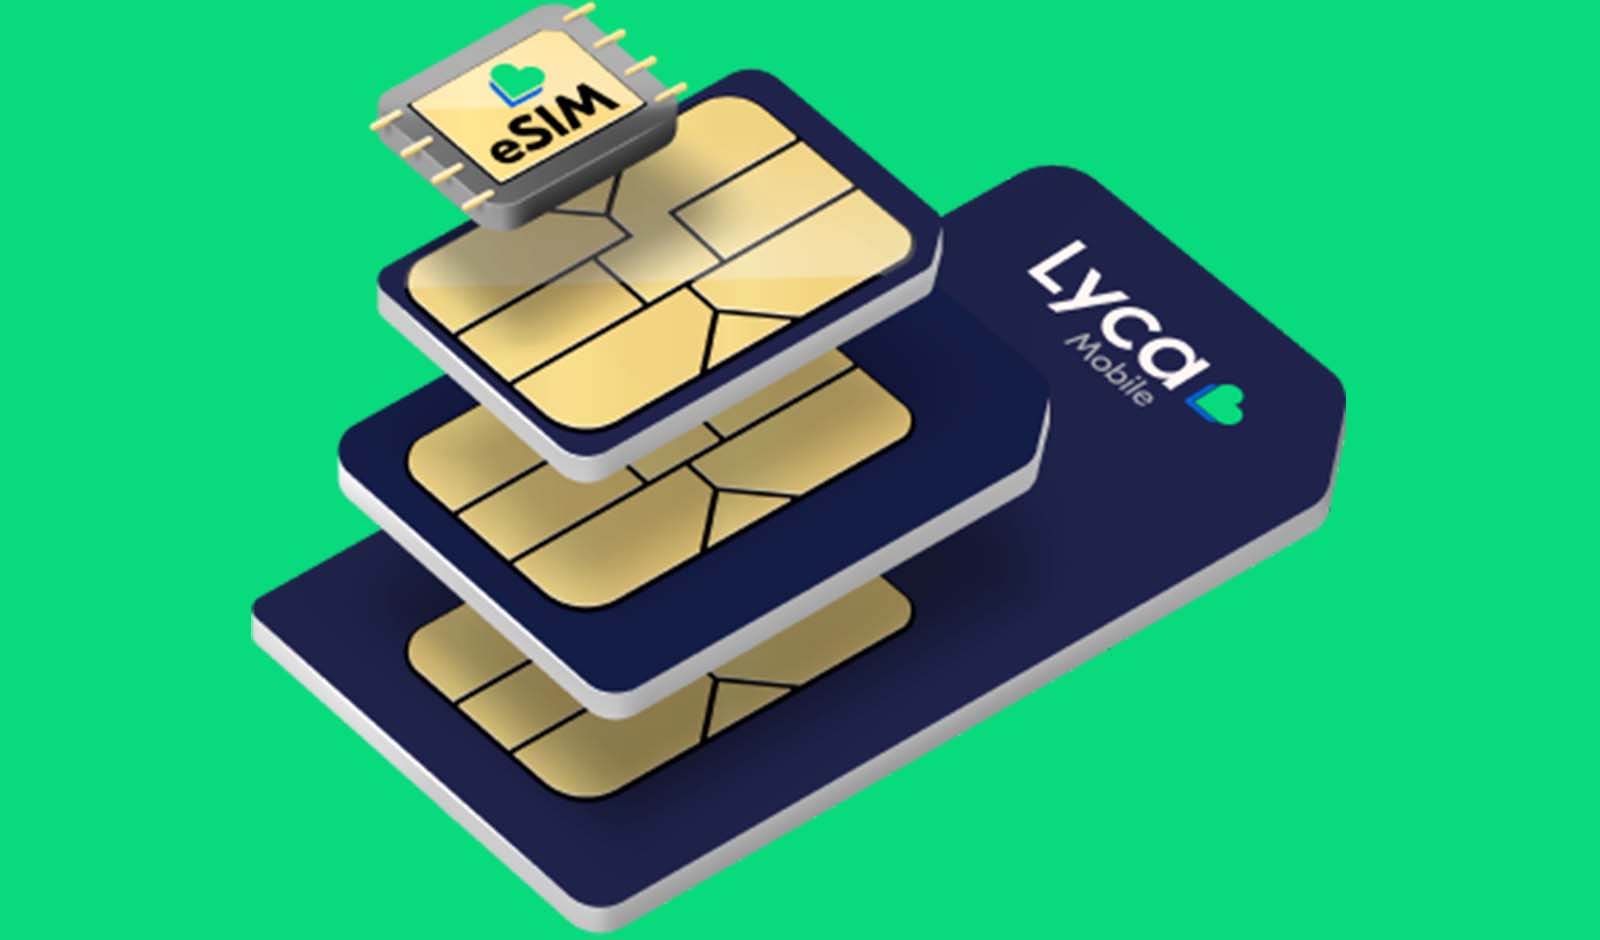 New Customer Deal: Get Unlimited UK Calls and Texts with 50GB a month for £7.90